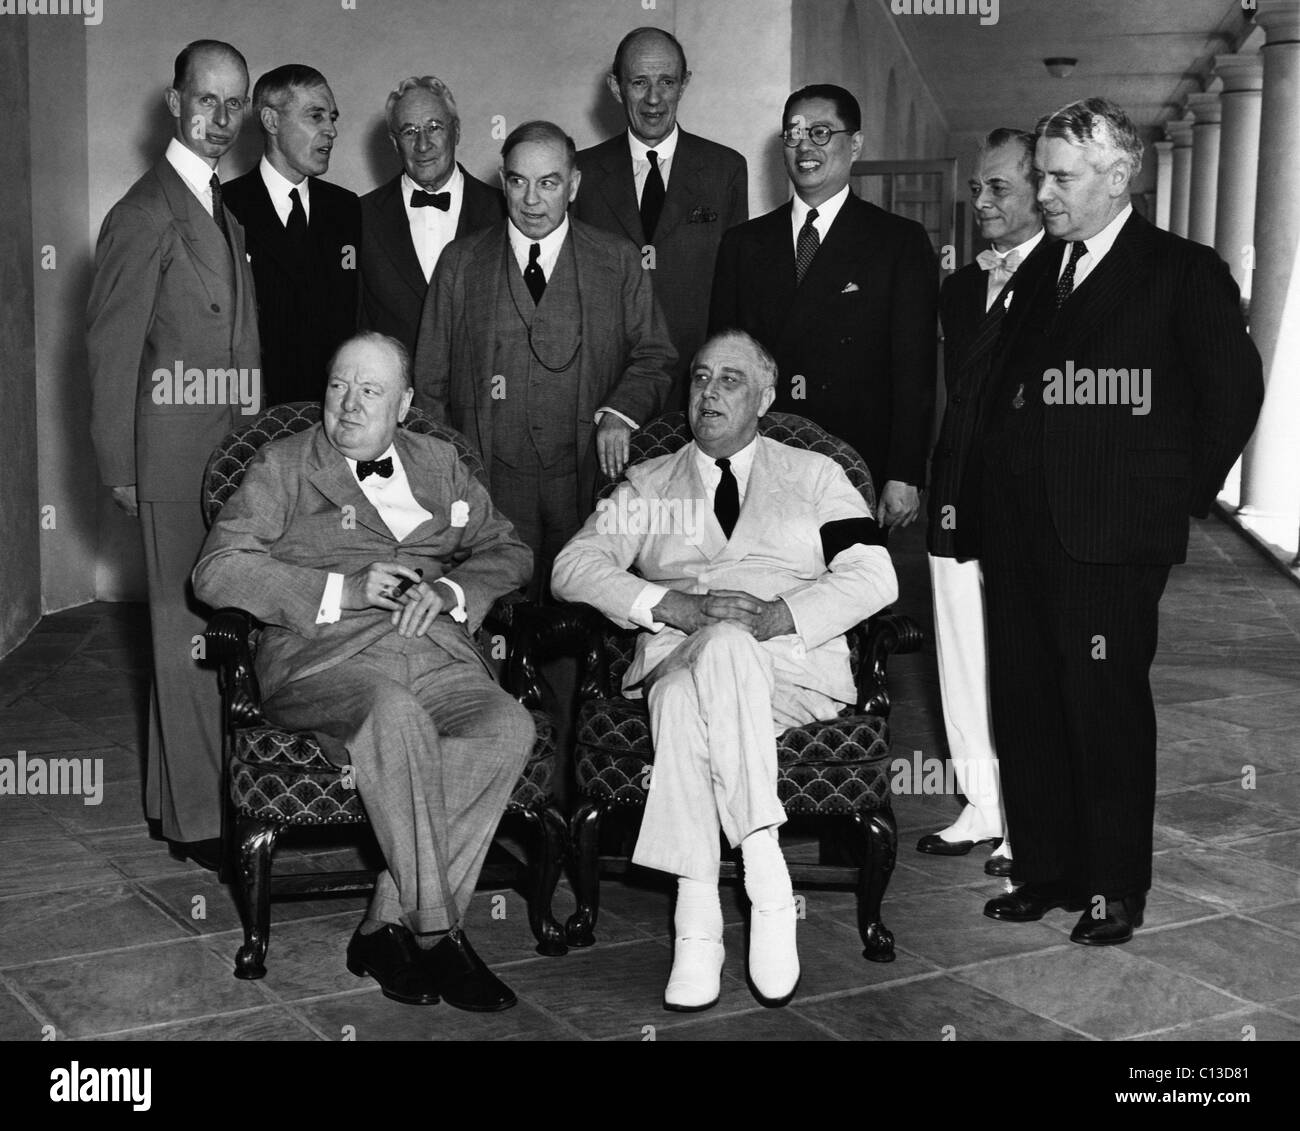 World War II. Seated, from left: British Prime Minister Winston Churchill, US President Franklin Delano Roosevelt. Standing, from left: Eelco Van Kleffens, Owen Dixon, Leighton McCarthy, W.L. Mackenzie King, E.F.L. Wood, T.V. Soong, Manuel Quezon, Walter Nash, Pacific War Council, White House, Washington, D.C., 1942. Stock Photo